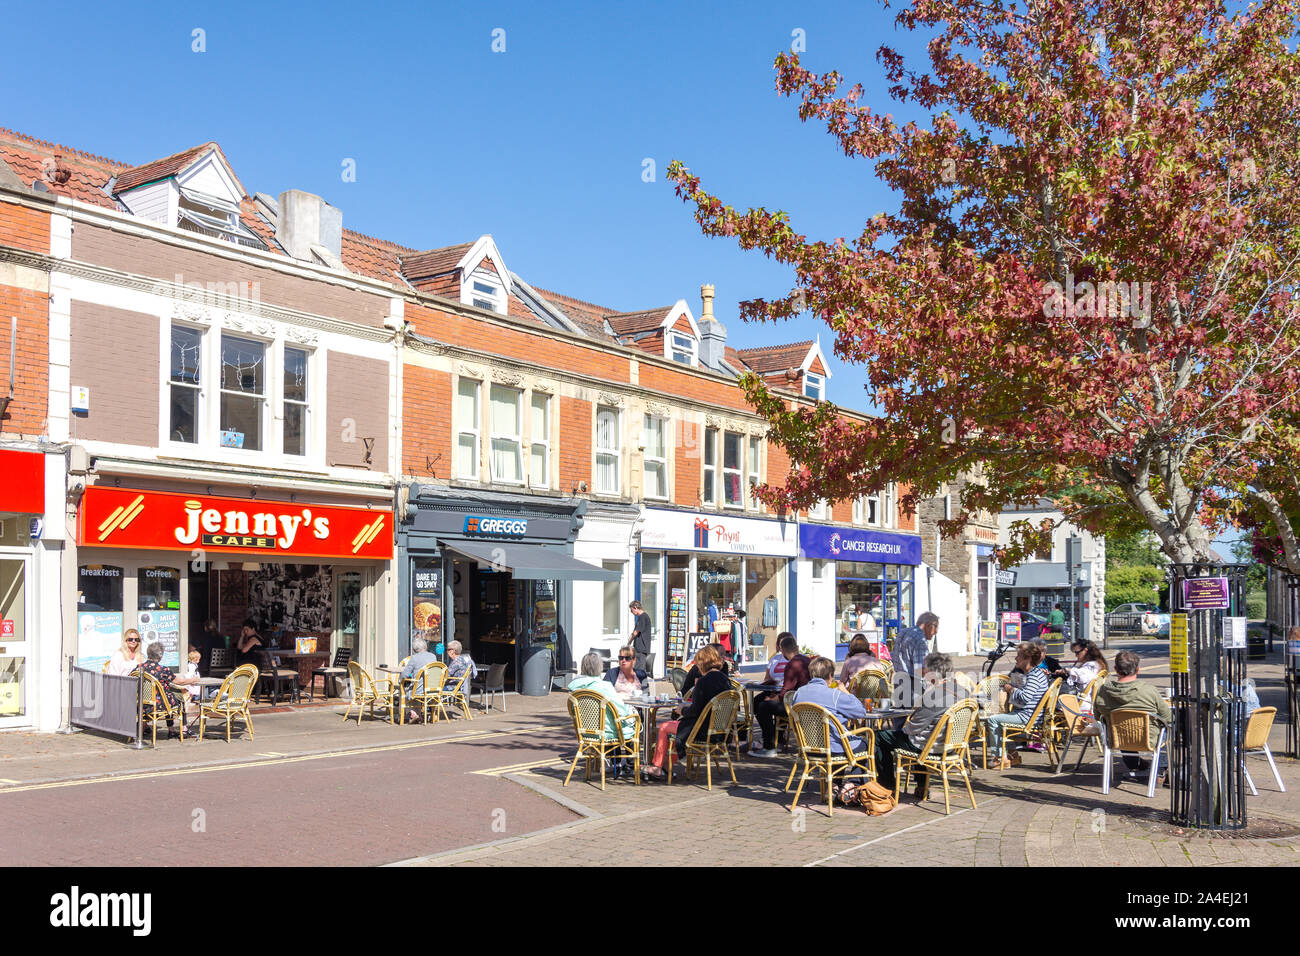 Outdoor cafes, Queen's Square, Clevedon, Somerset, England, United Kingdom Stock Photo